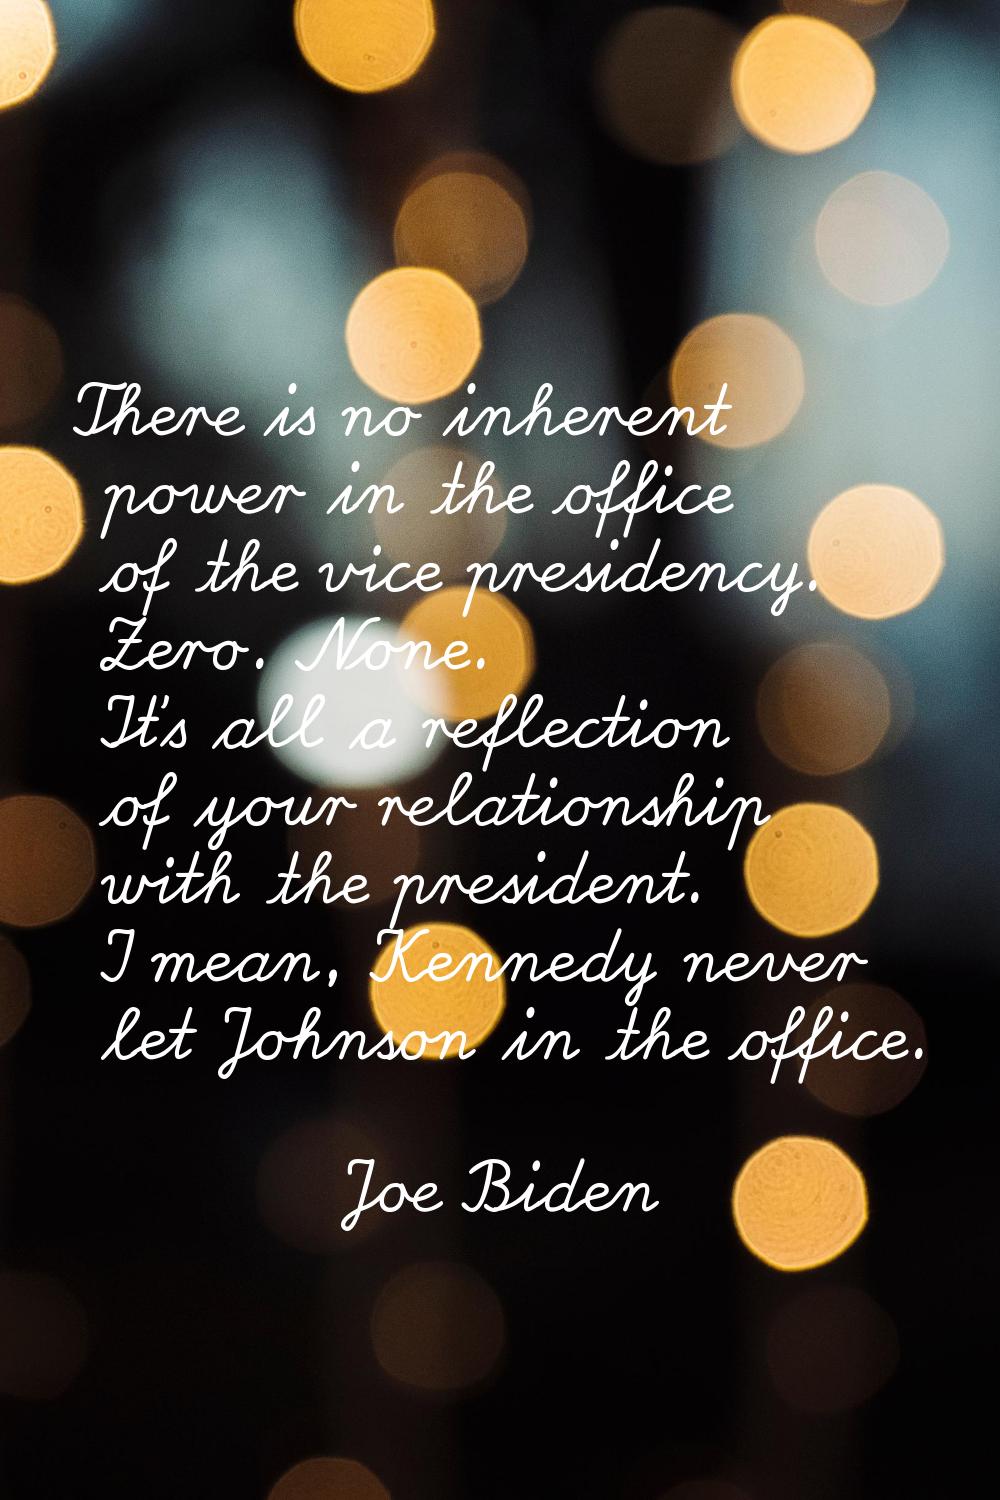 There is no inherent power in the office of the vice presidency. Zero. None. It's all a reflection 